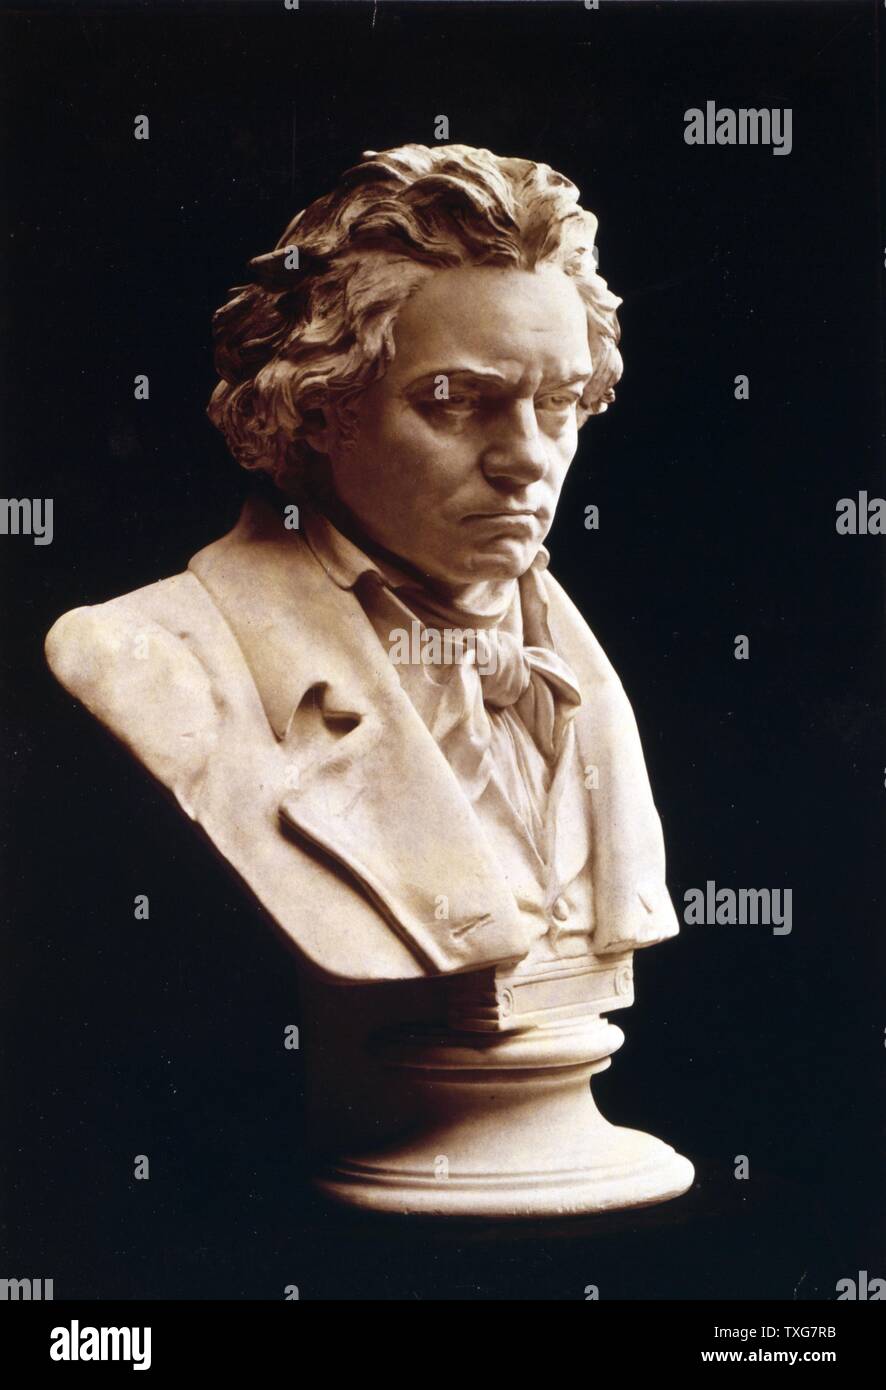 Bust of Ludwig van Beethoven, German composer and pianist. One of the most influential western composers whose music bridged the Classical and Romantic periods Stock Photo